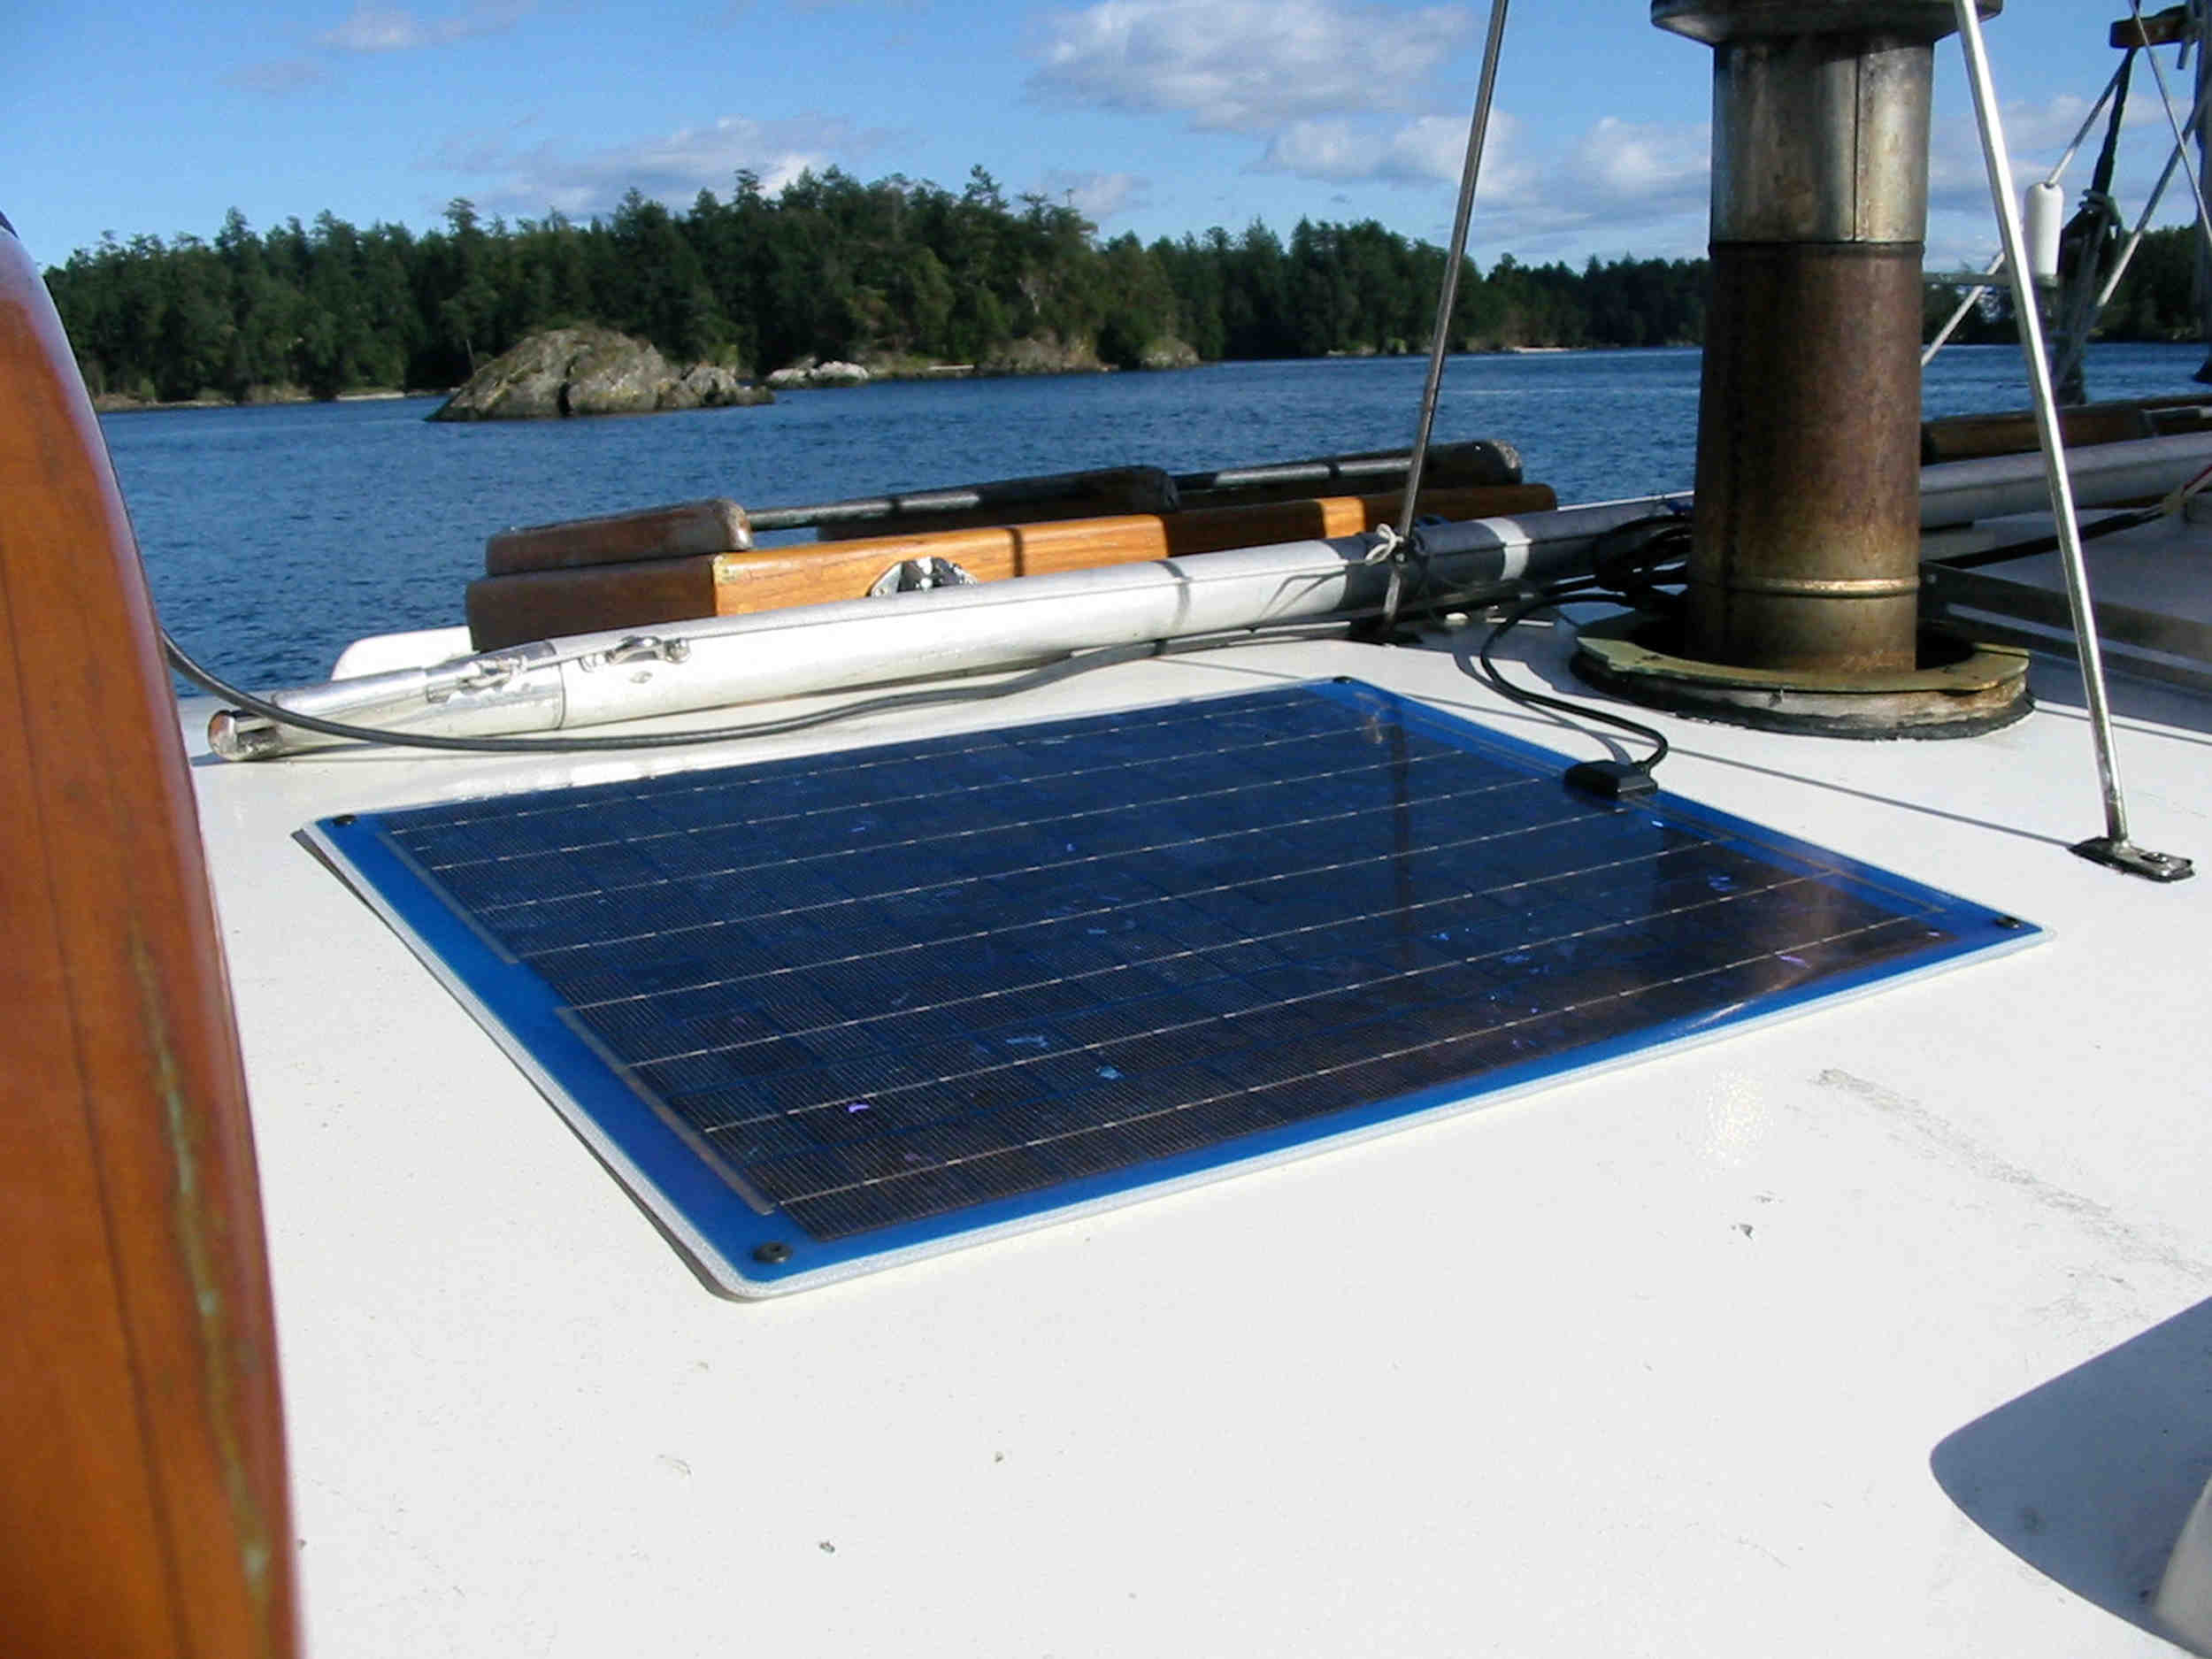 Are marine batteries good for solar?